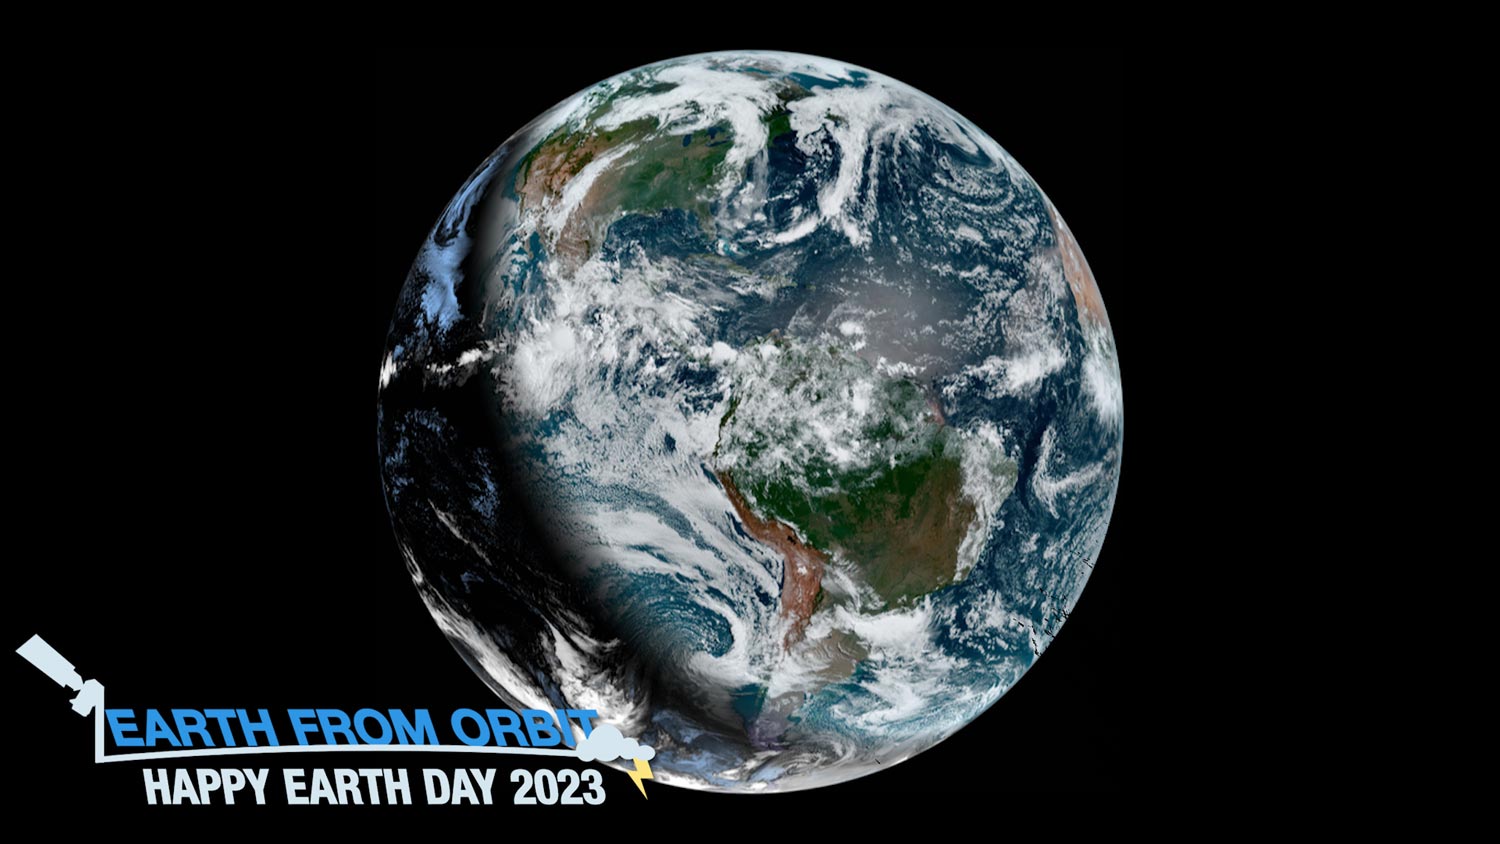  Happy Earth Day 2023